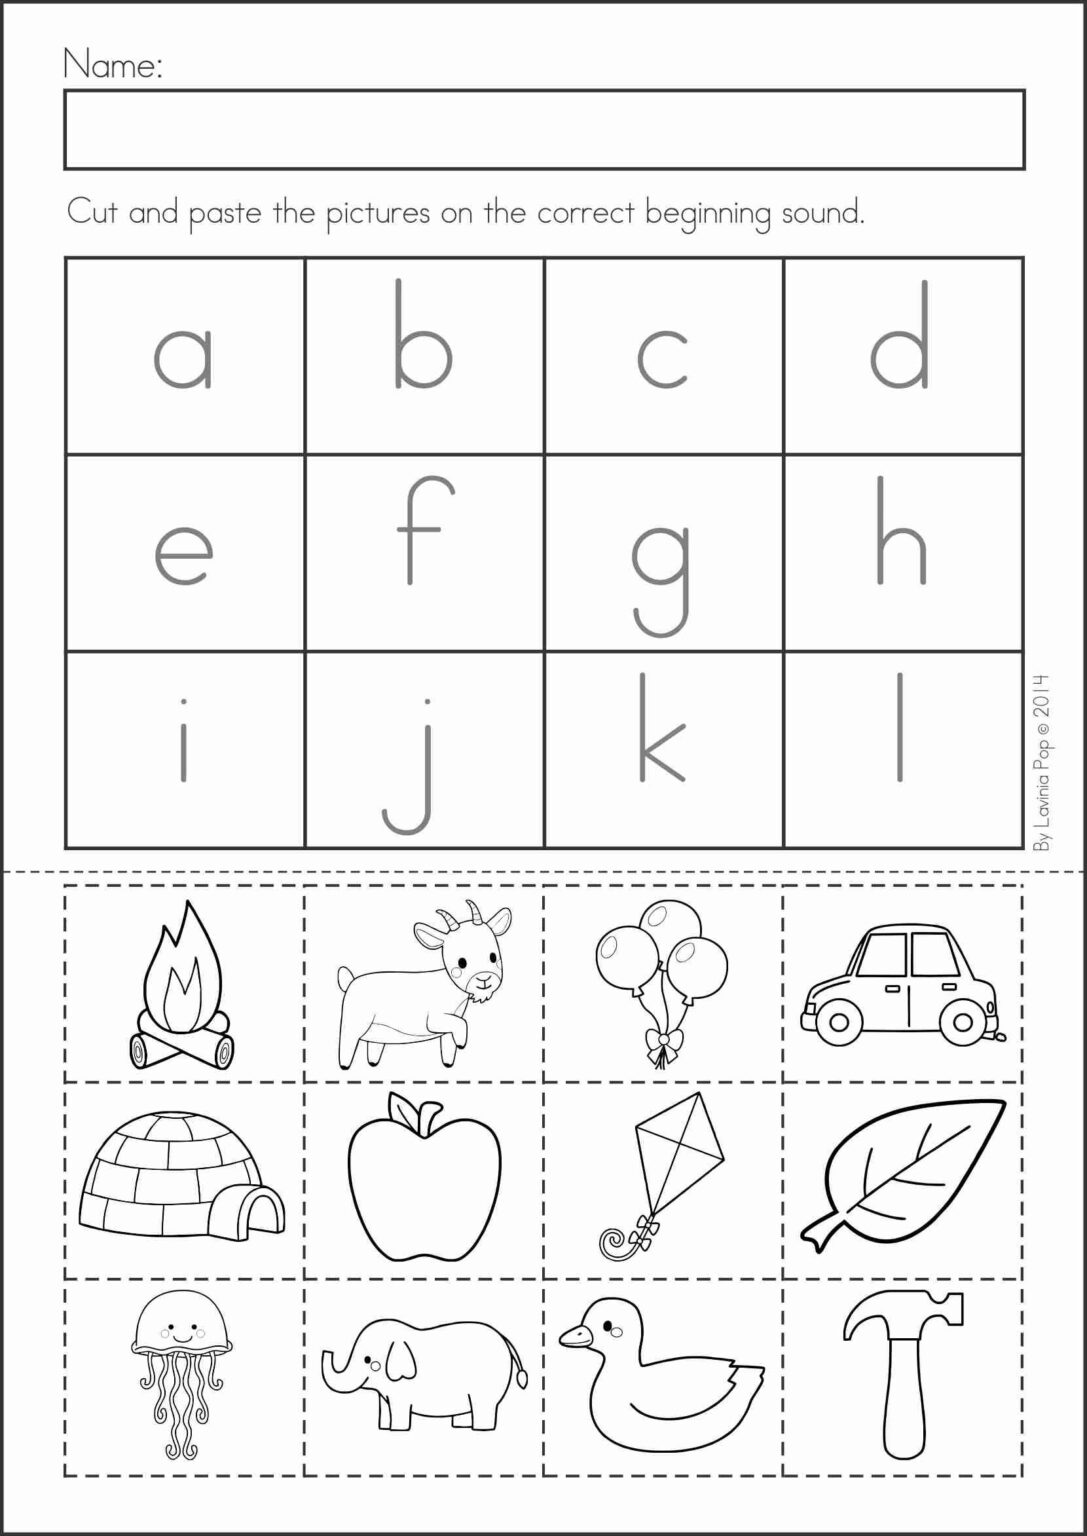 Free Printable Cut And Paste Worksheets For Second Grade